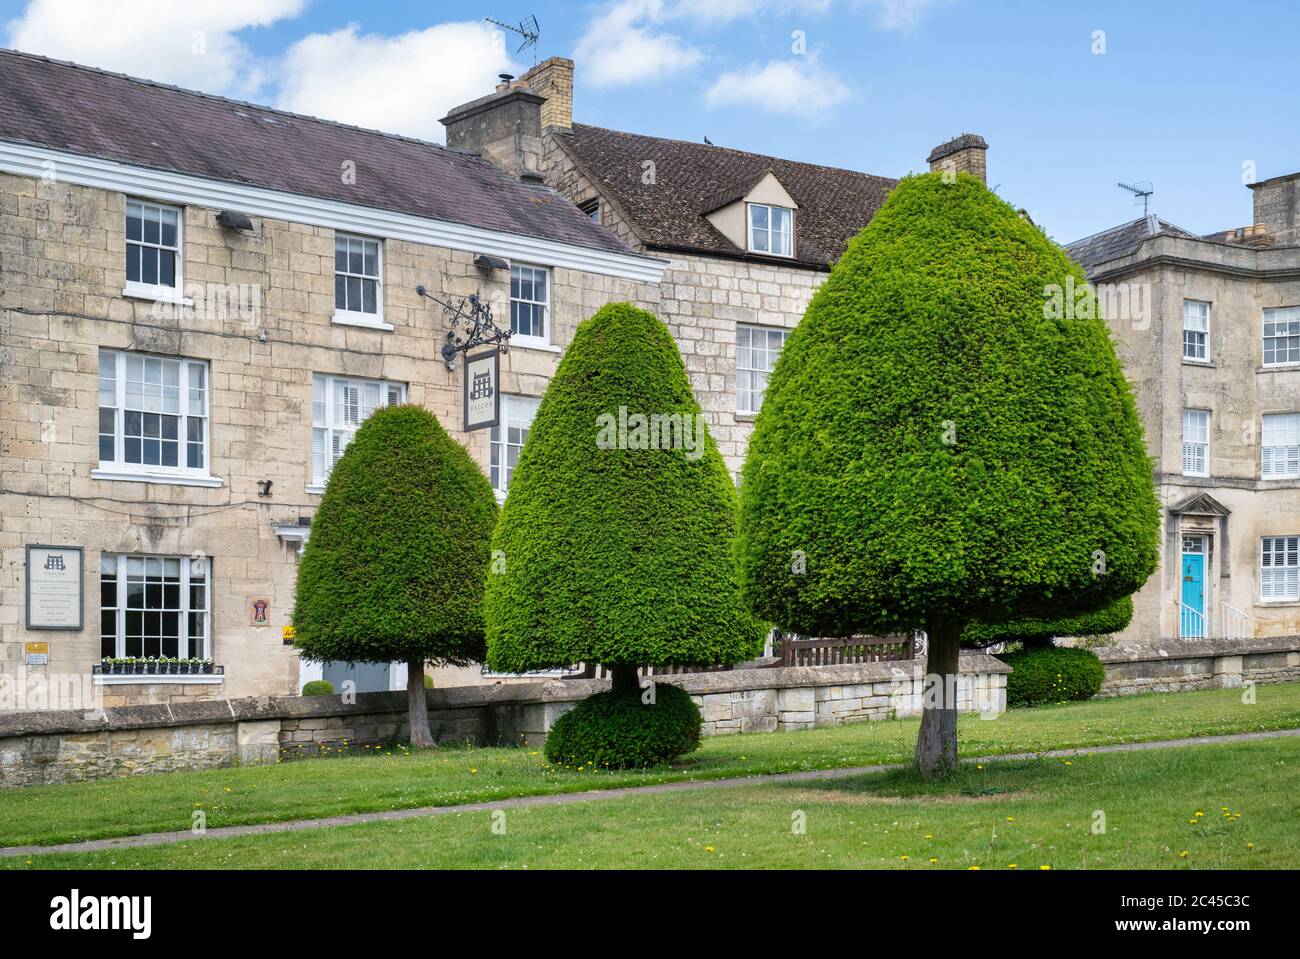 Yew trees in the grounds of St Marys church. Painswick, Clostwolds, Gloucestershire, England Stock Photo